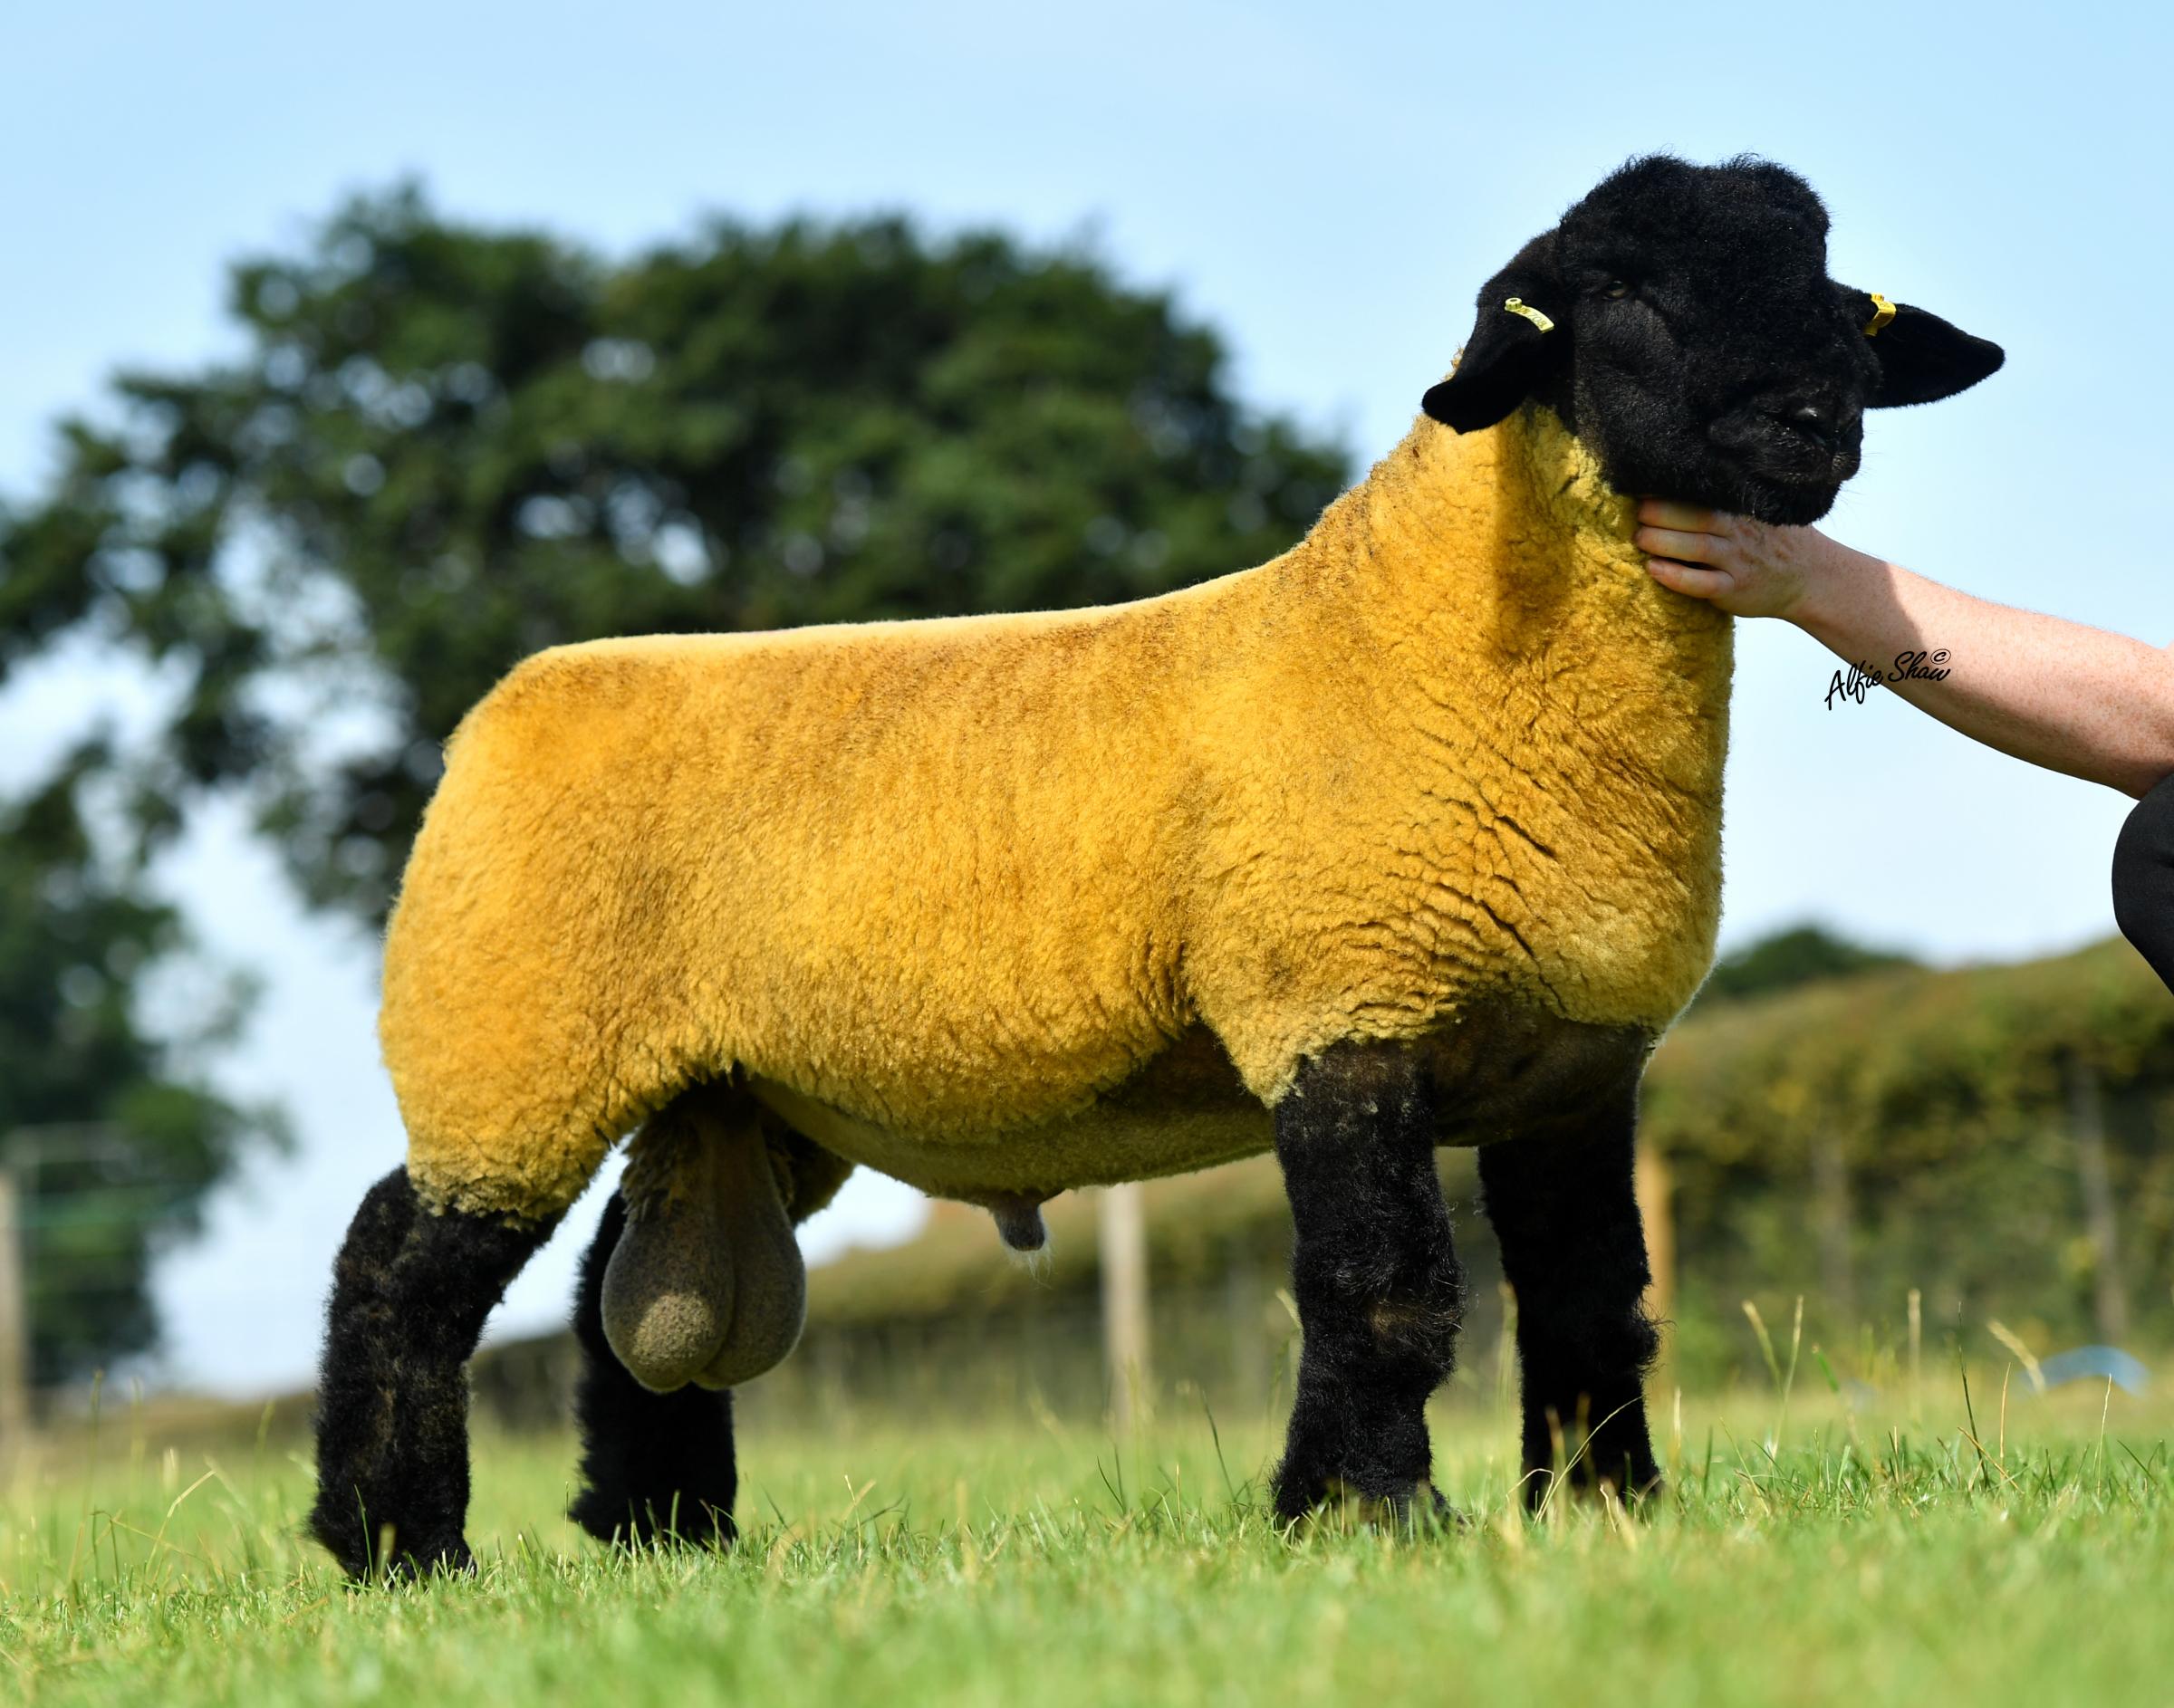 Mark Priestley, Limestone achieved a personal best of 48,000gns